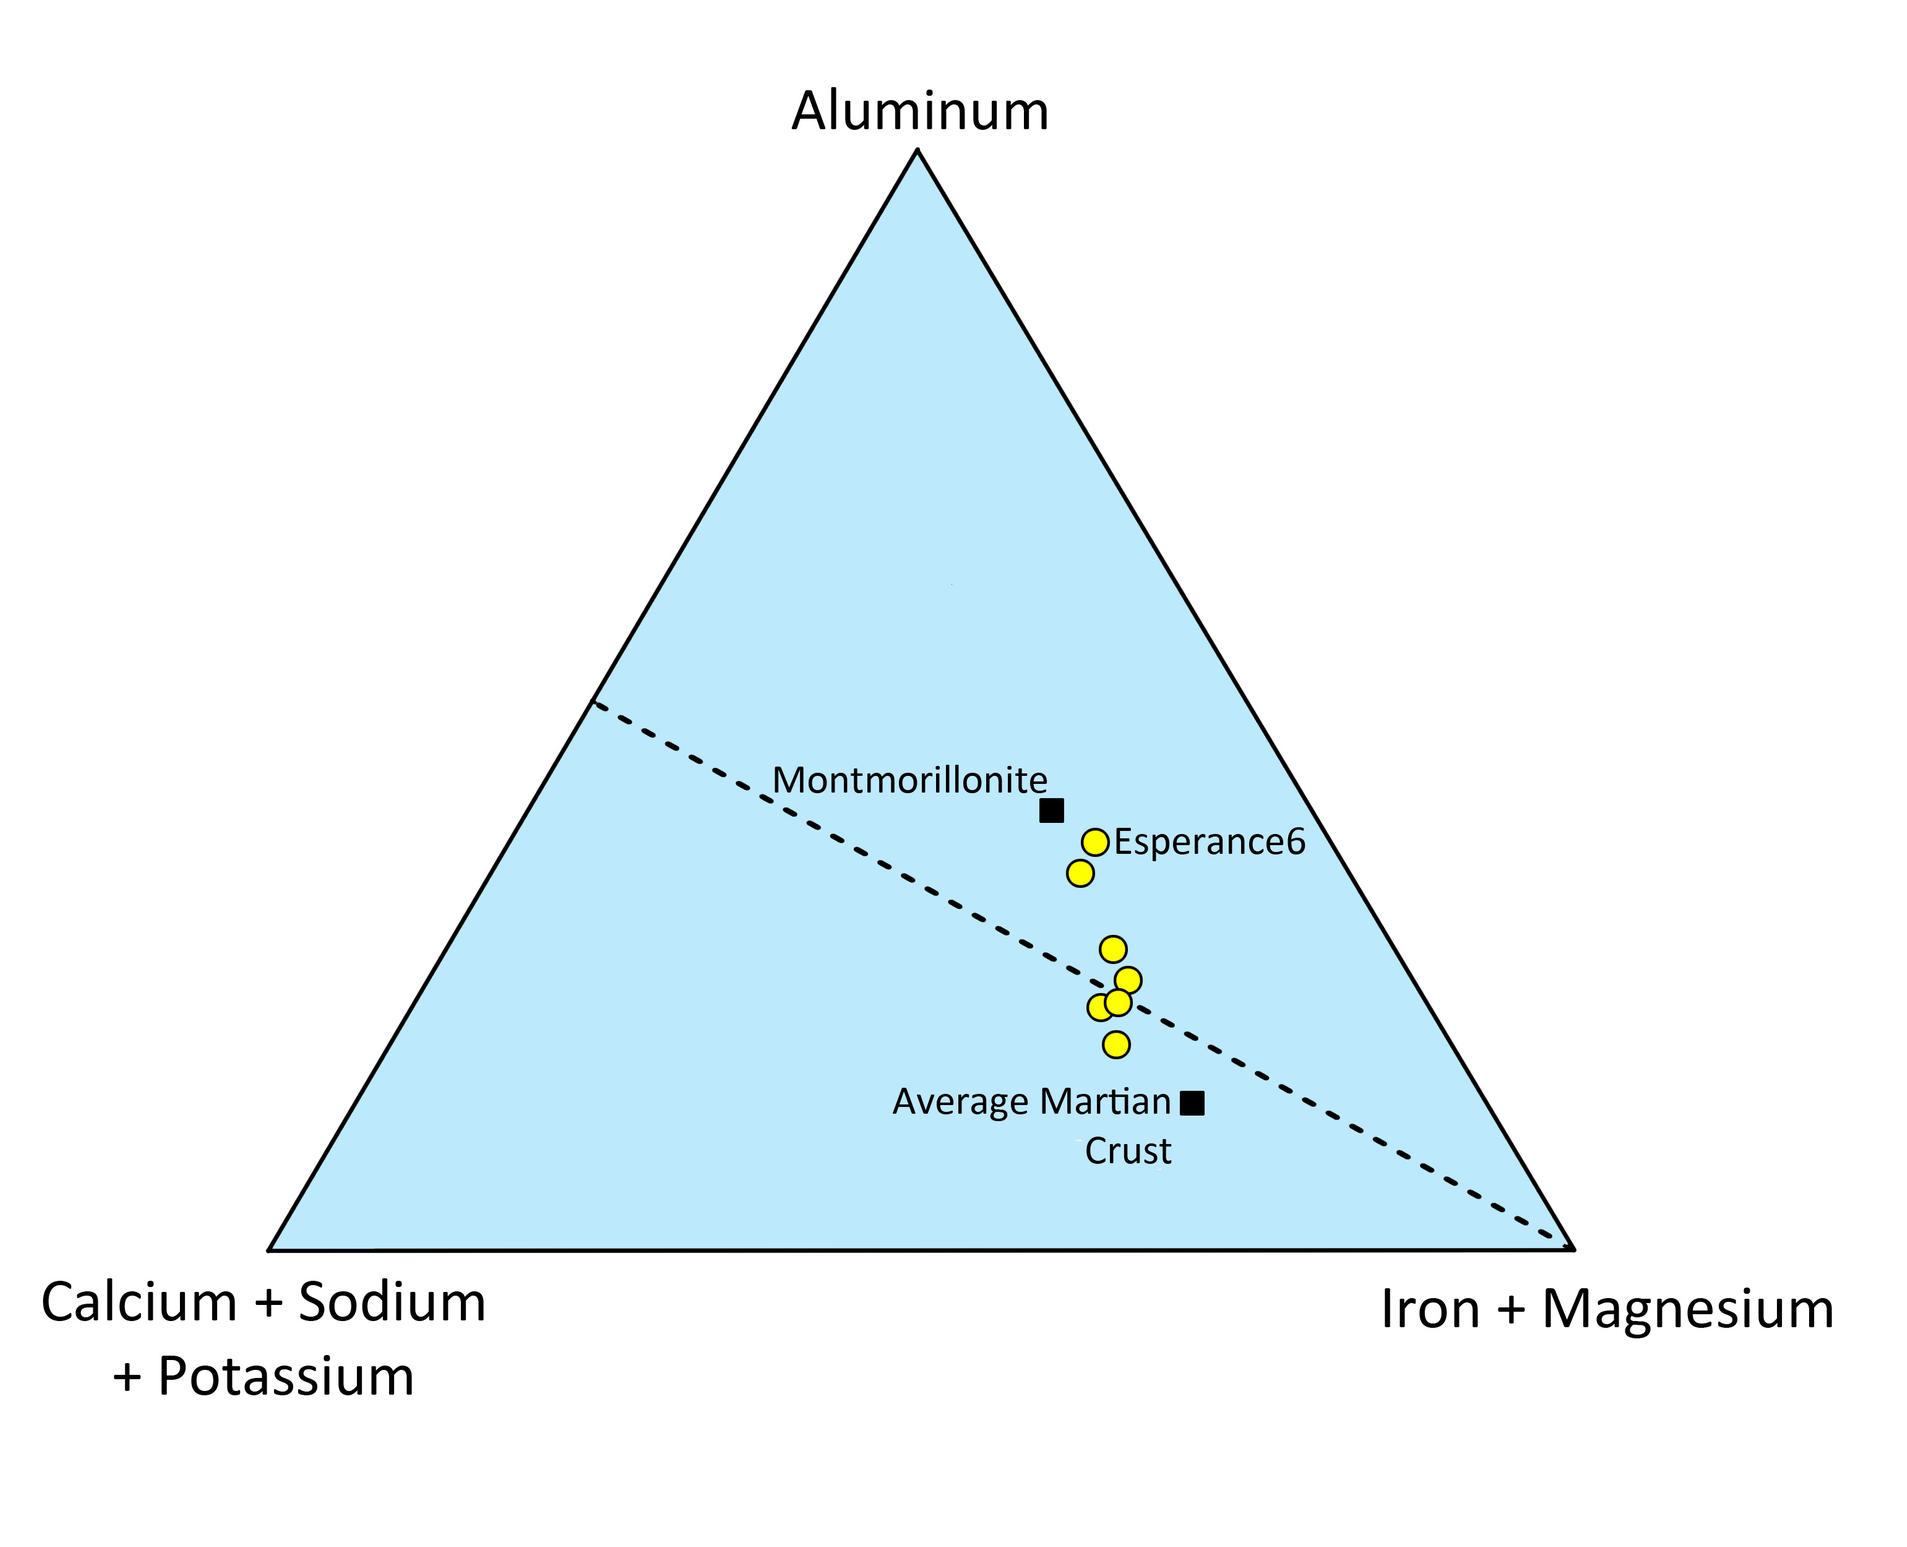 This triangle plot shows the relative concentrations of some of the major chemical elements in the Martian rock "Esperance."